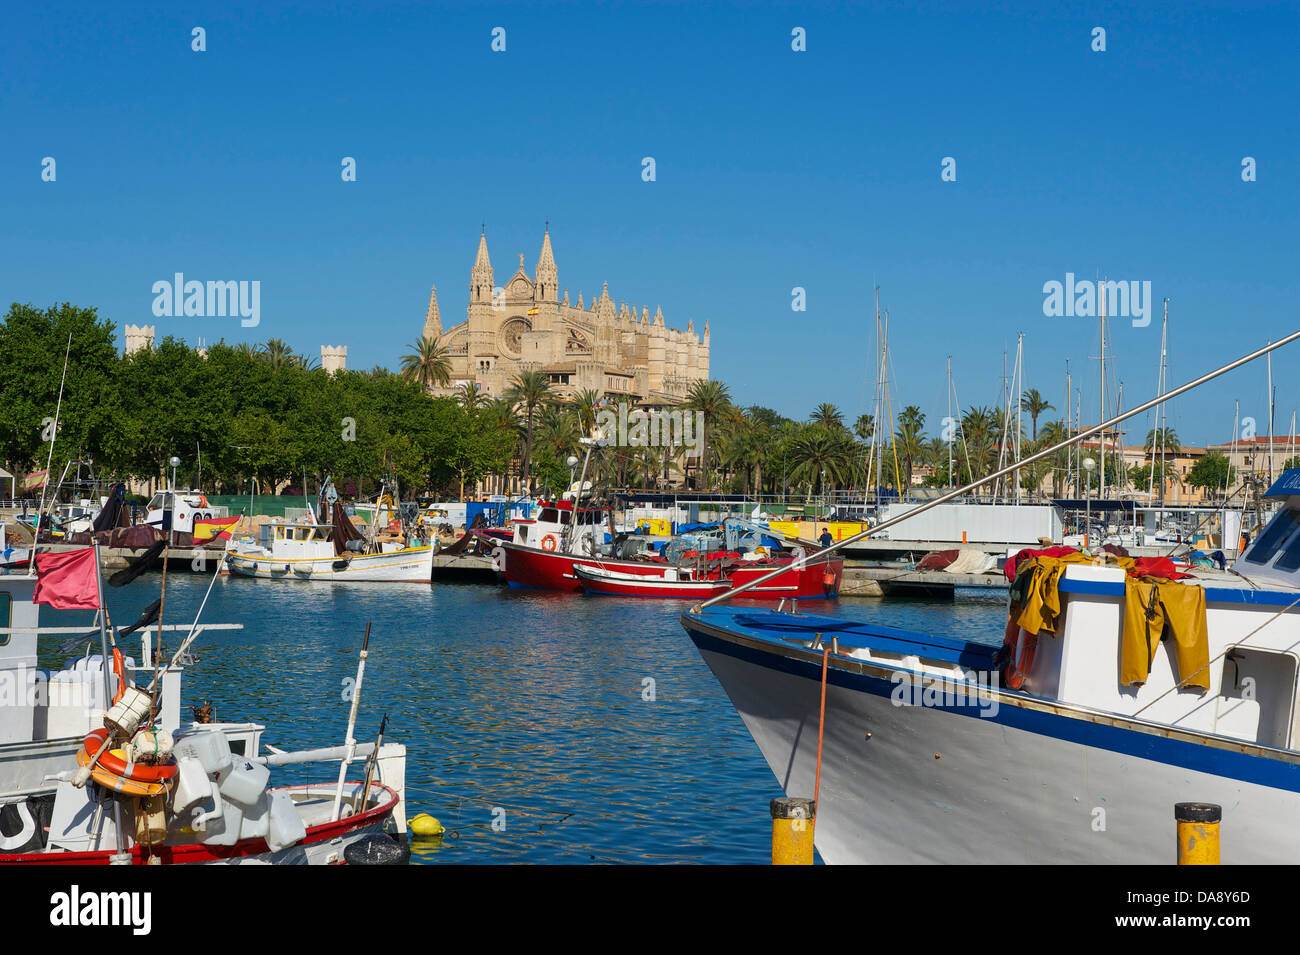 Balearic Islands, Majorca, Mallorca, Spain, Europe, outside, cathedral, cathedrals, cathedral, dome, church, churches, religion, Stock Photo